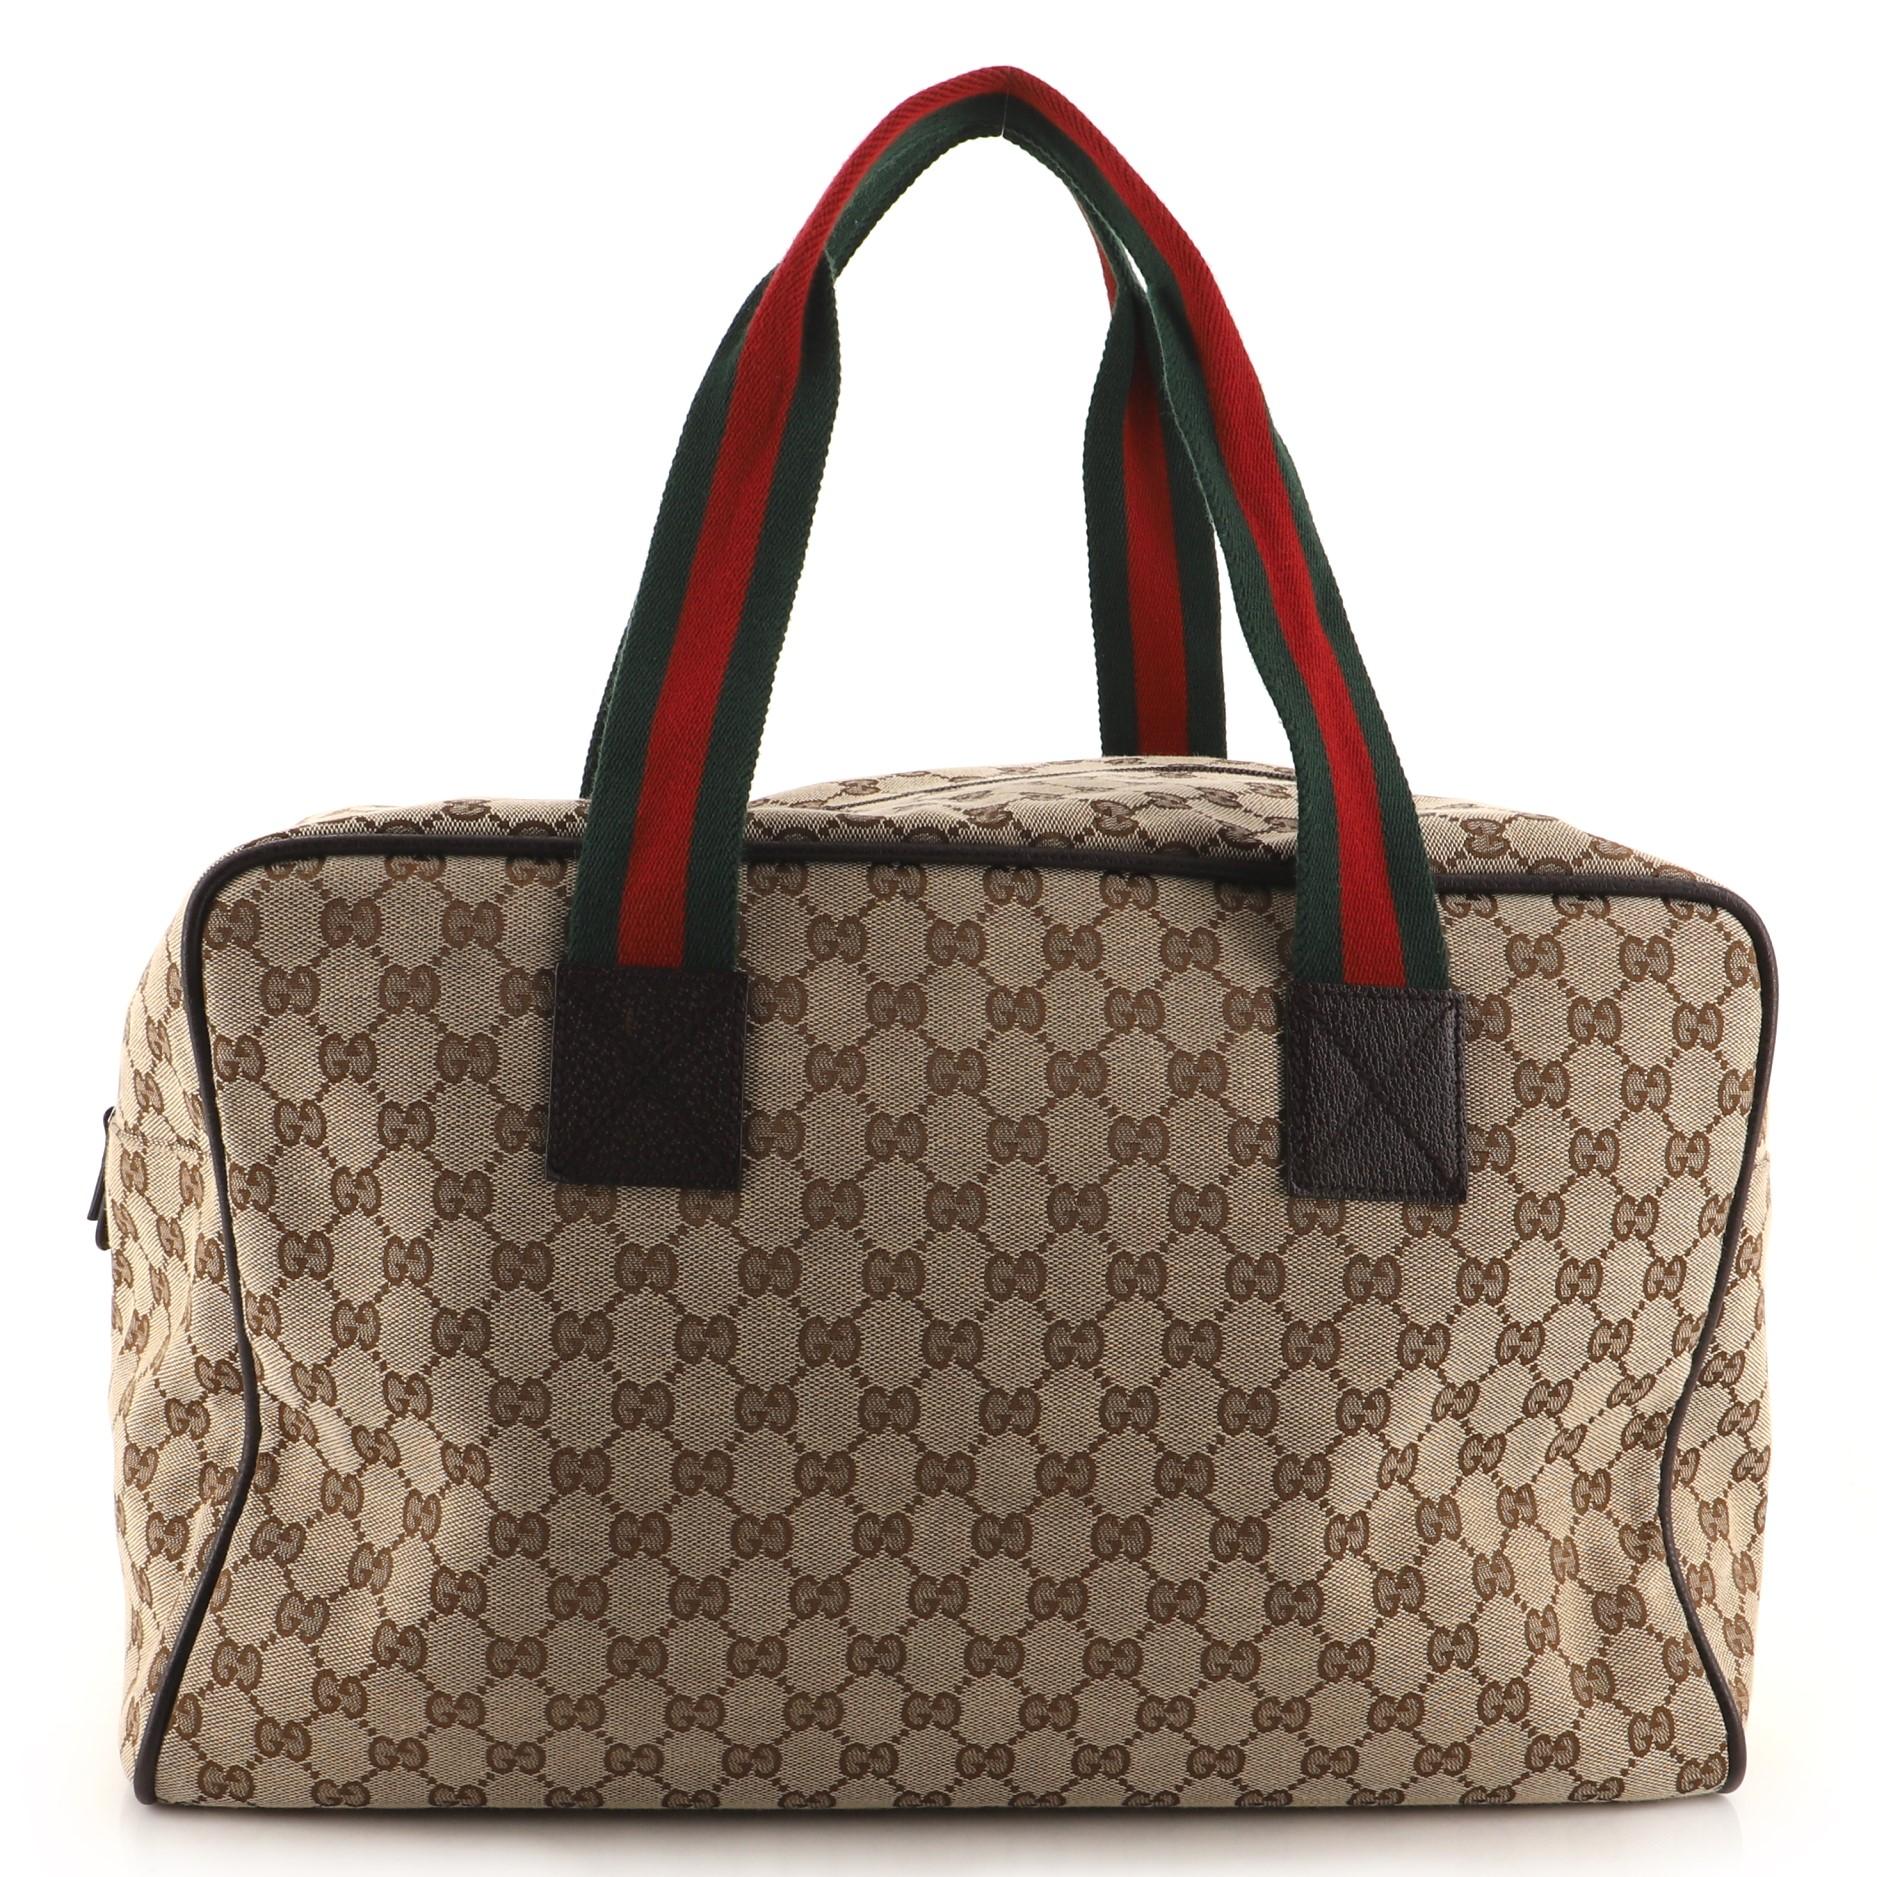 Authentic Gucci brown monogram coated canvas travel bag | Canvas travel bag,  Gucci travel bag, Bags